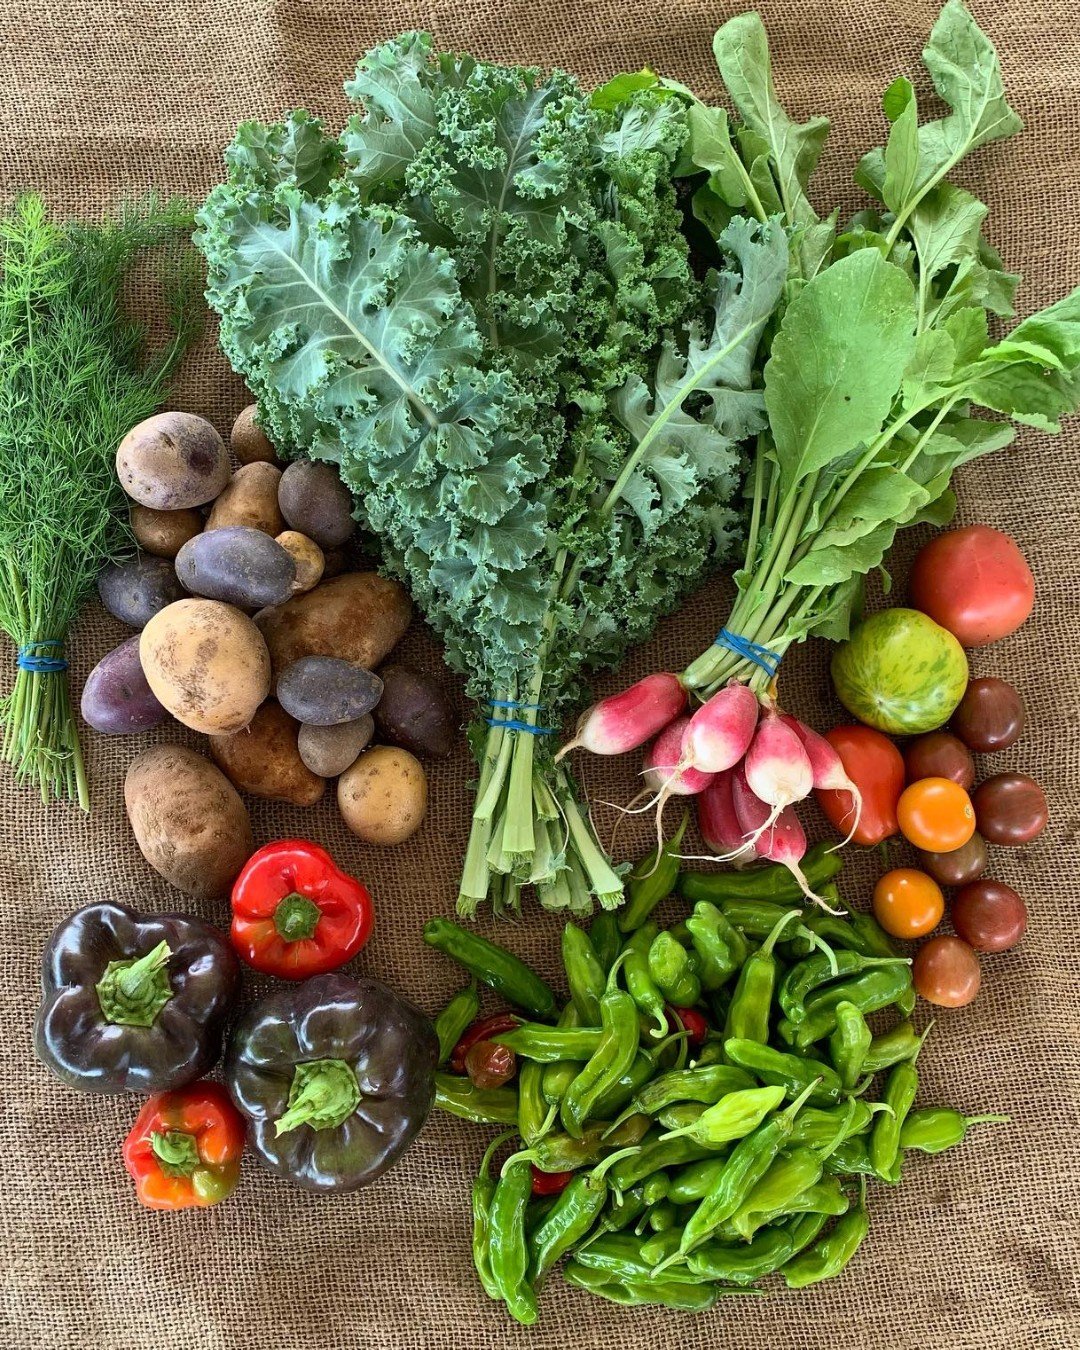 Many of the local farms that participate in the the Co-op Farm Tour sell their farm goods direct to consumers through CSA shares. Right now, these and other local farms are accepting CSA sign-ups, and many local cooperative grocery stores are pickup 